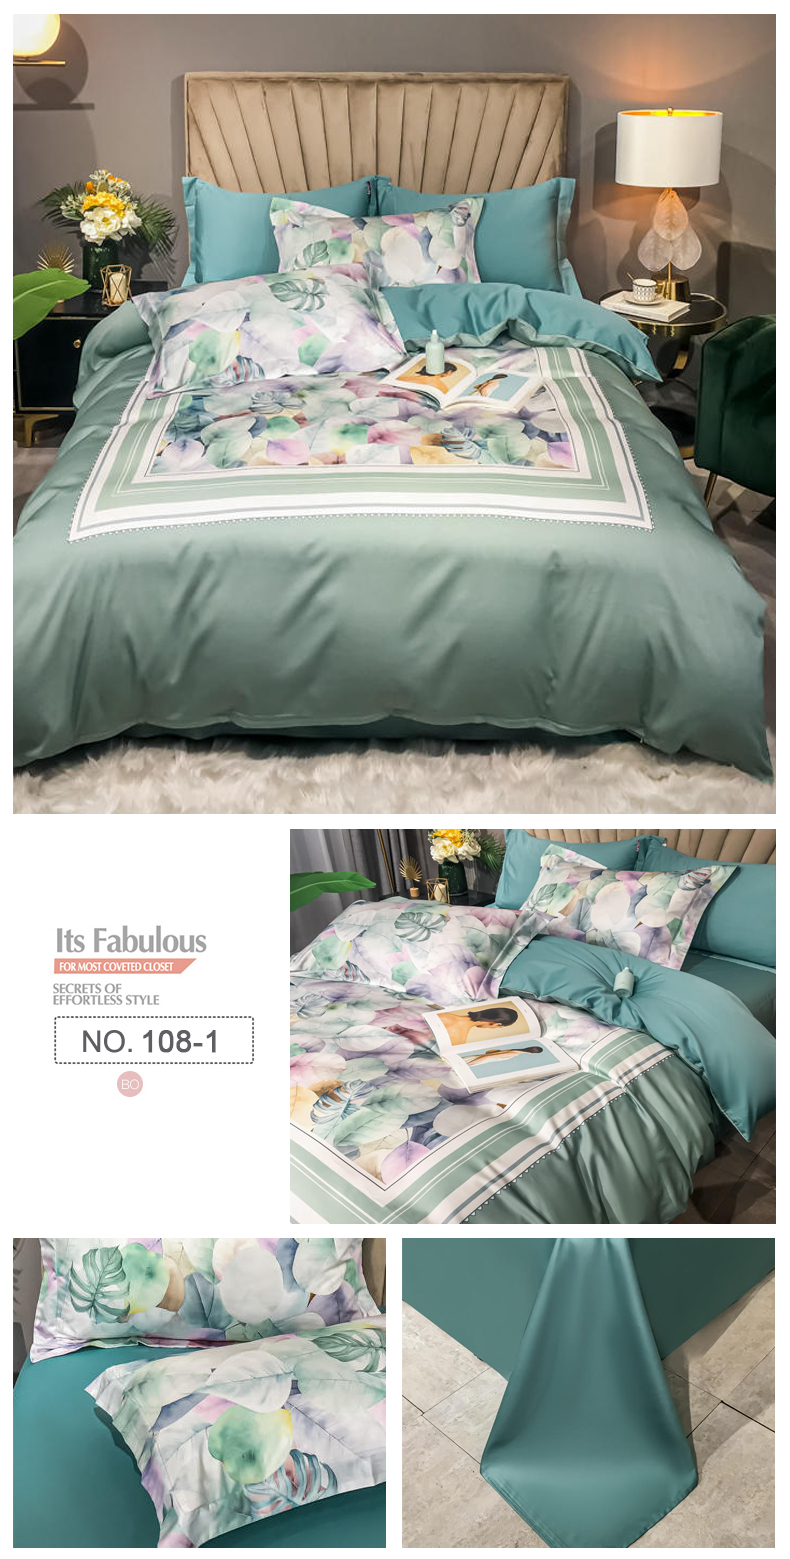 Single Made In China Duvet Cover